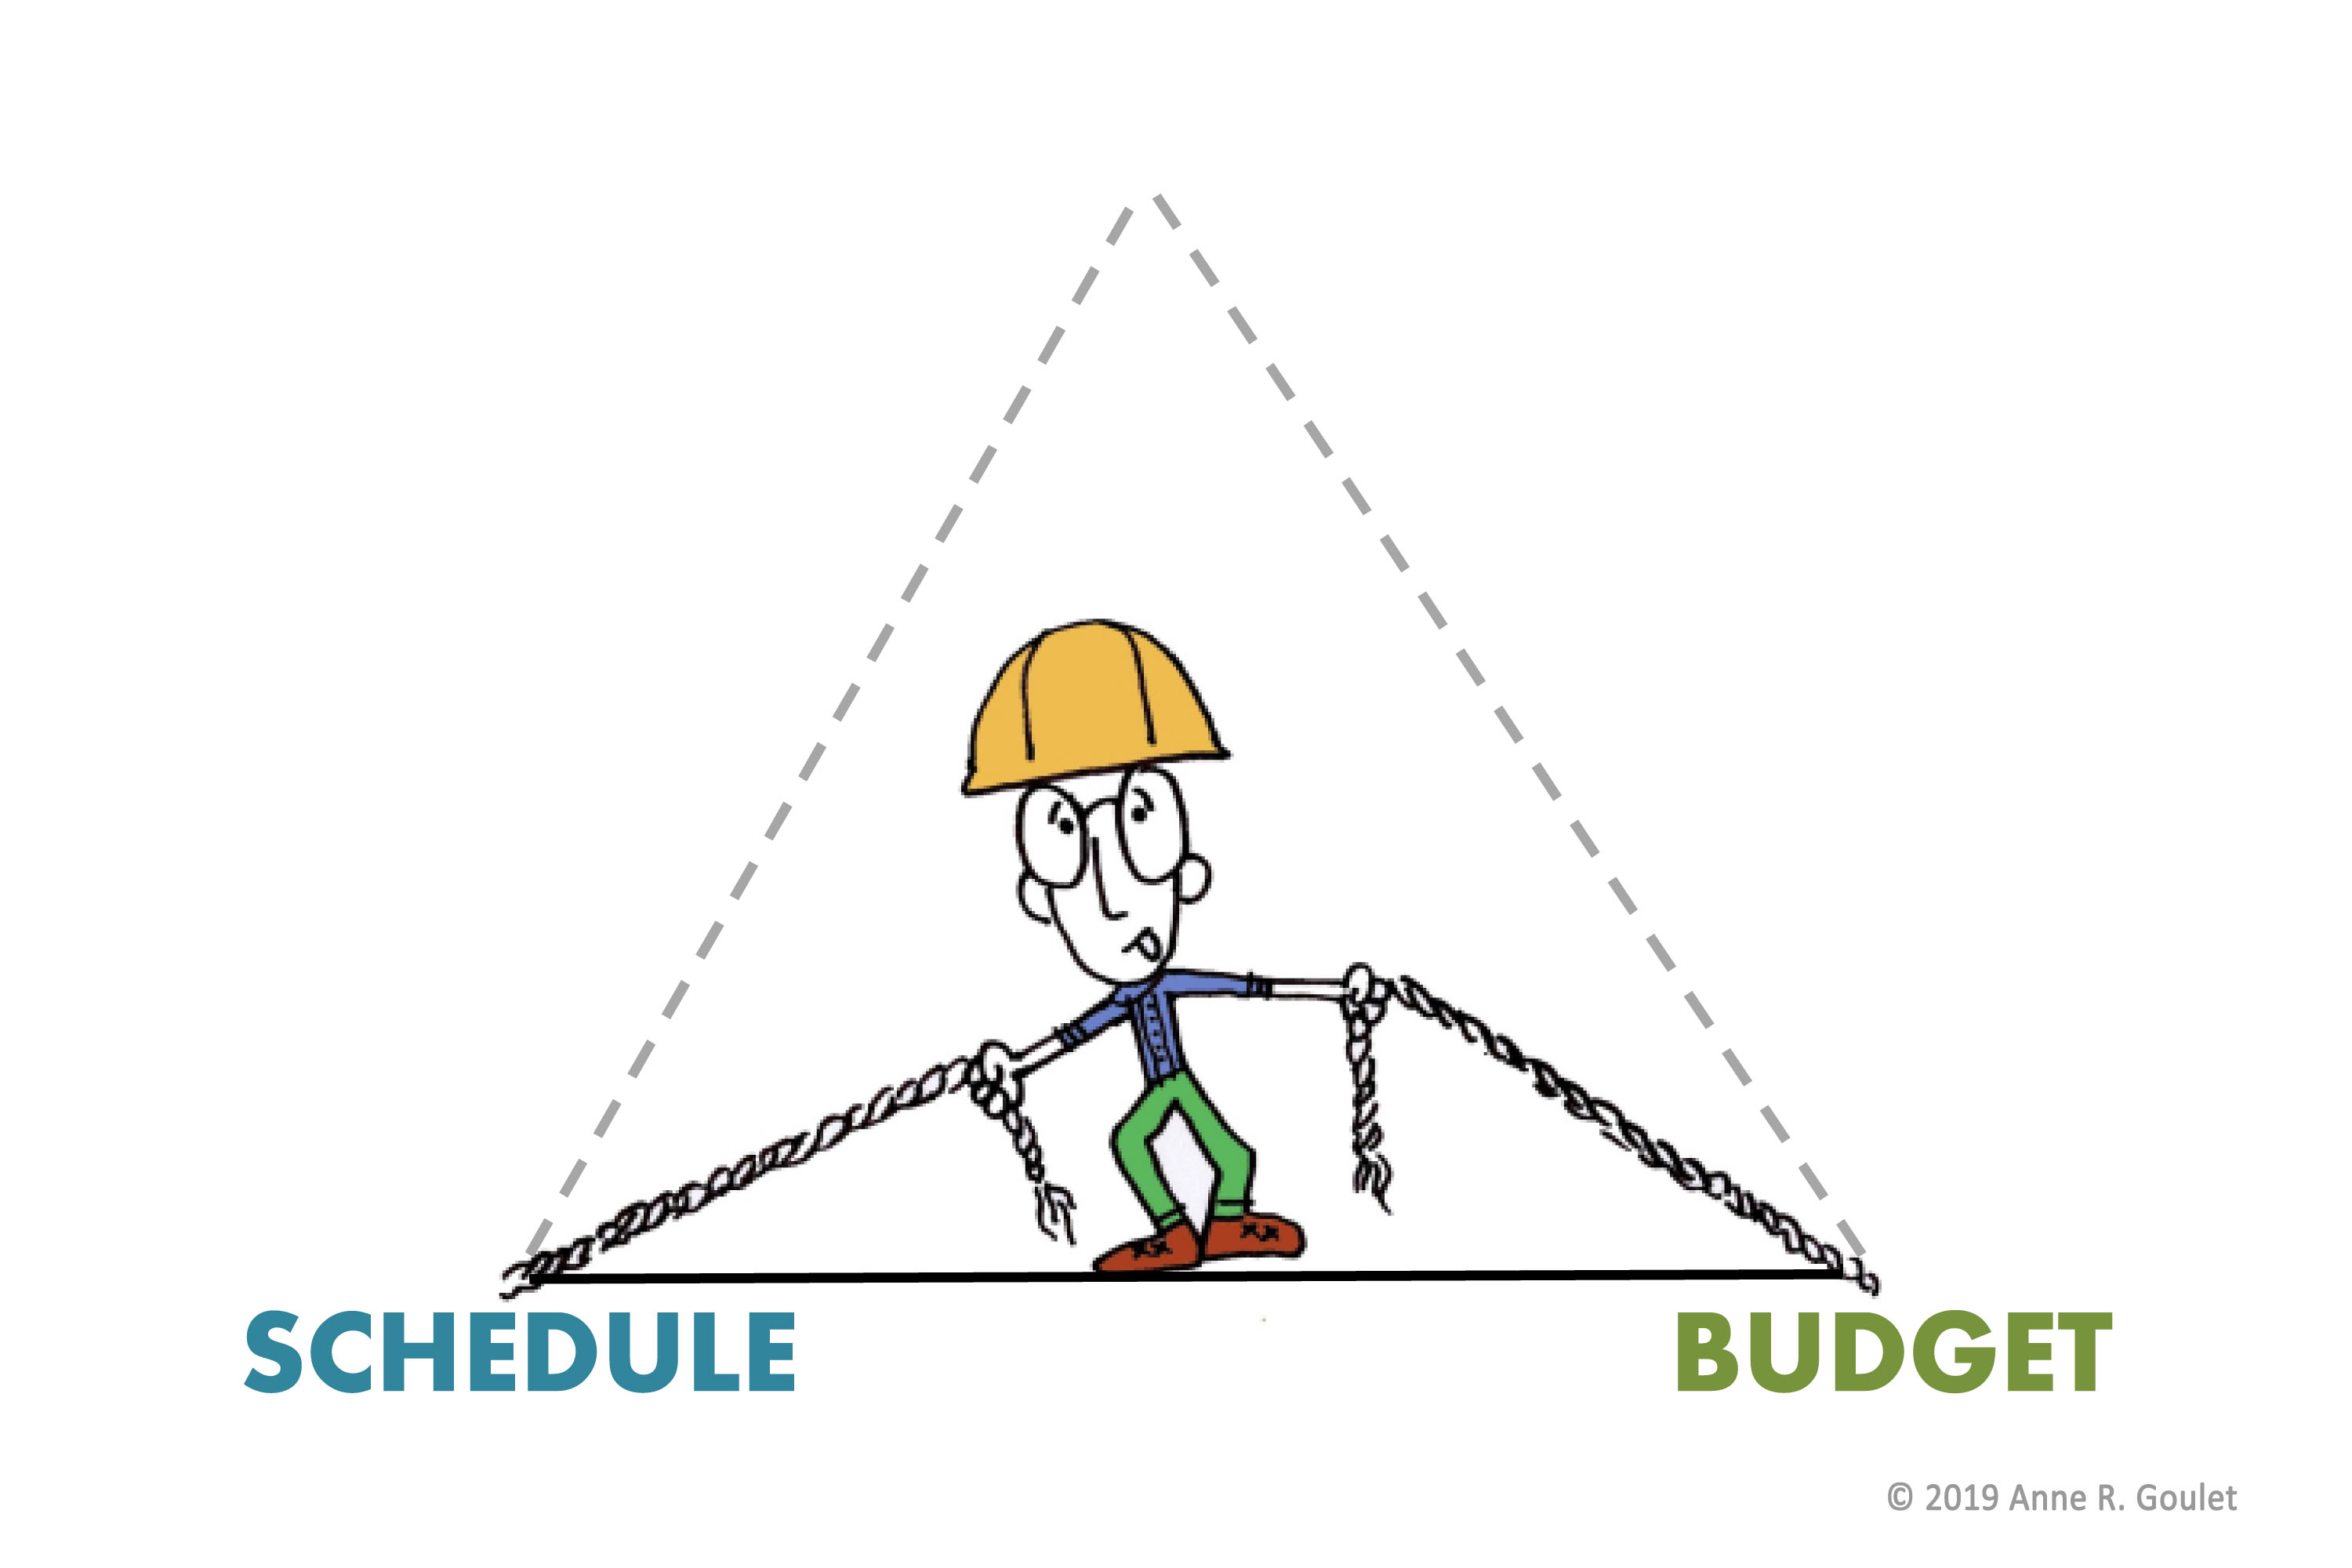 The classic Scope, Schedule, and Budget Triangle: Budget